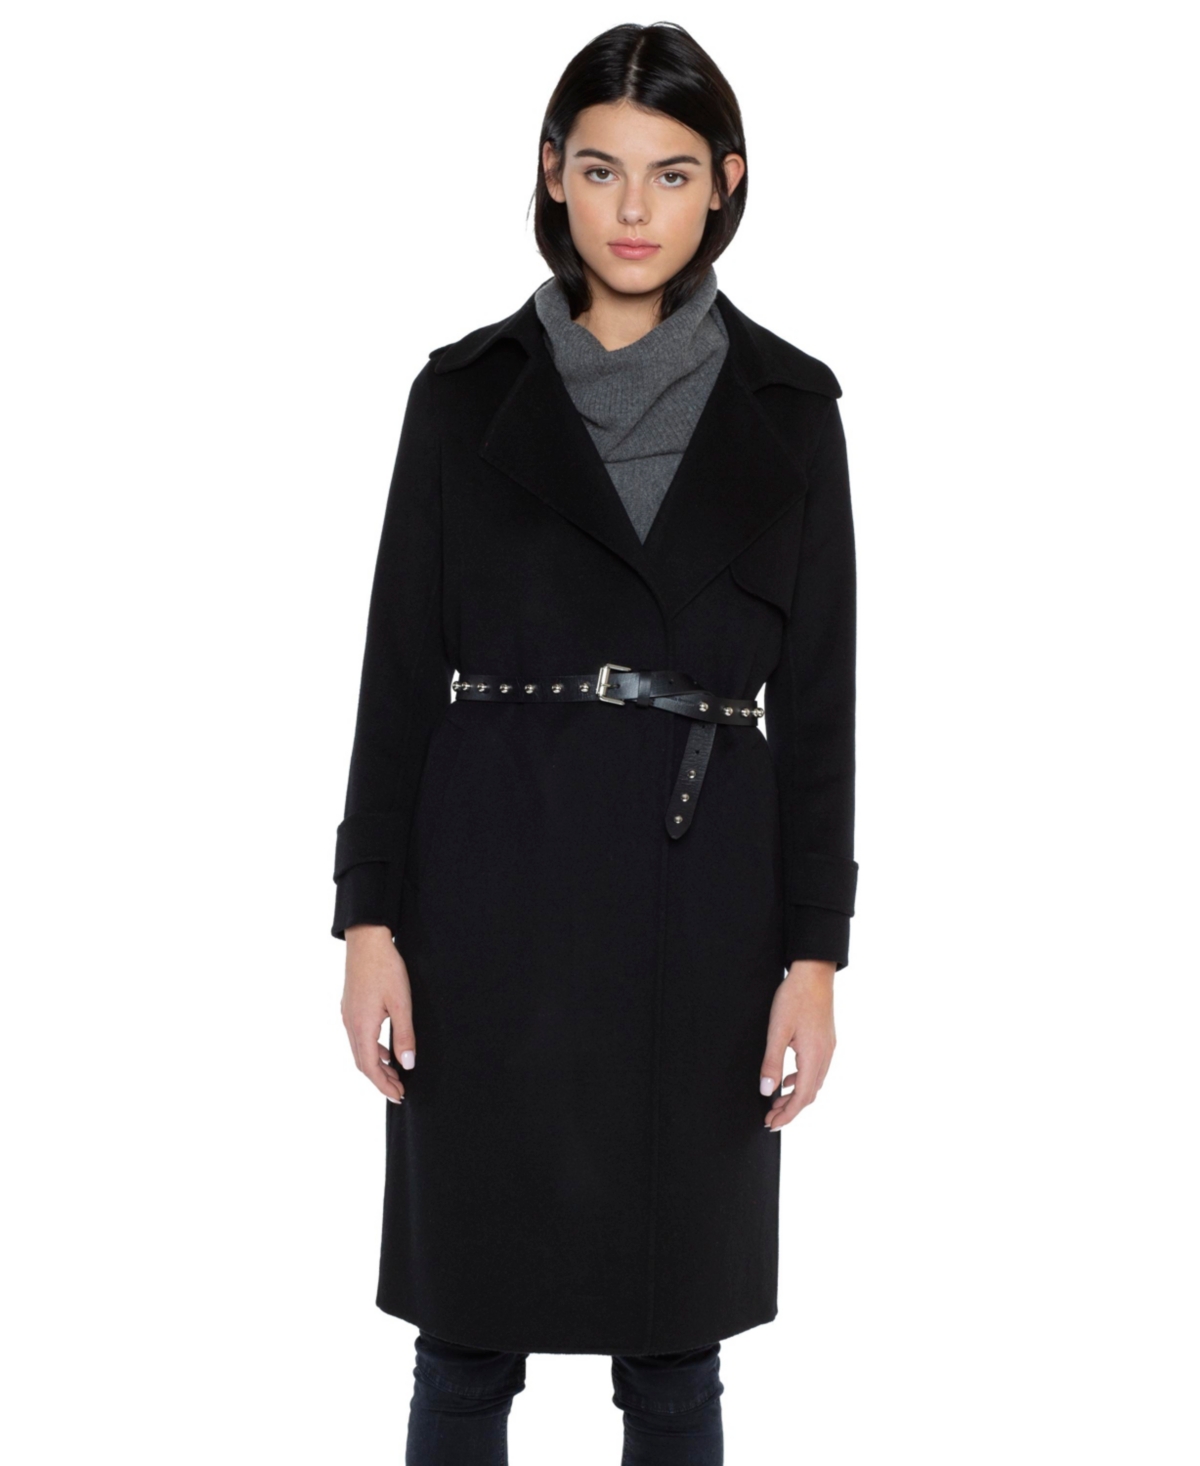 Women's Cashmere Wool Double-faced Overcoat - Charcoal